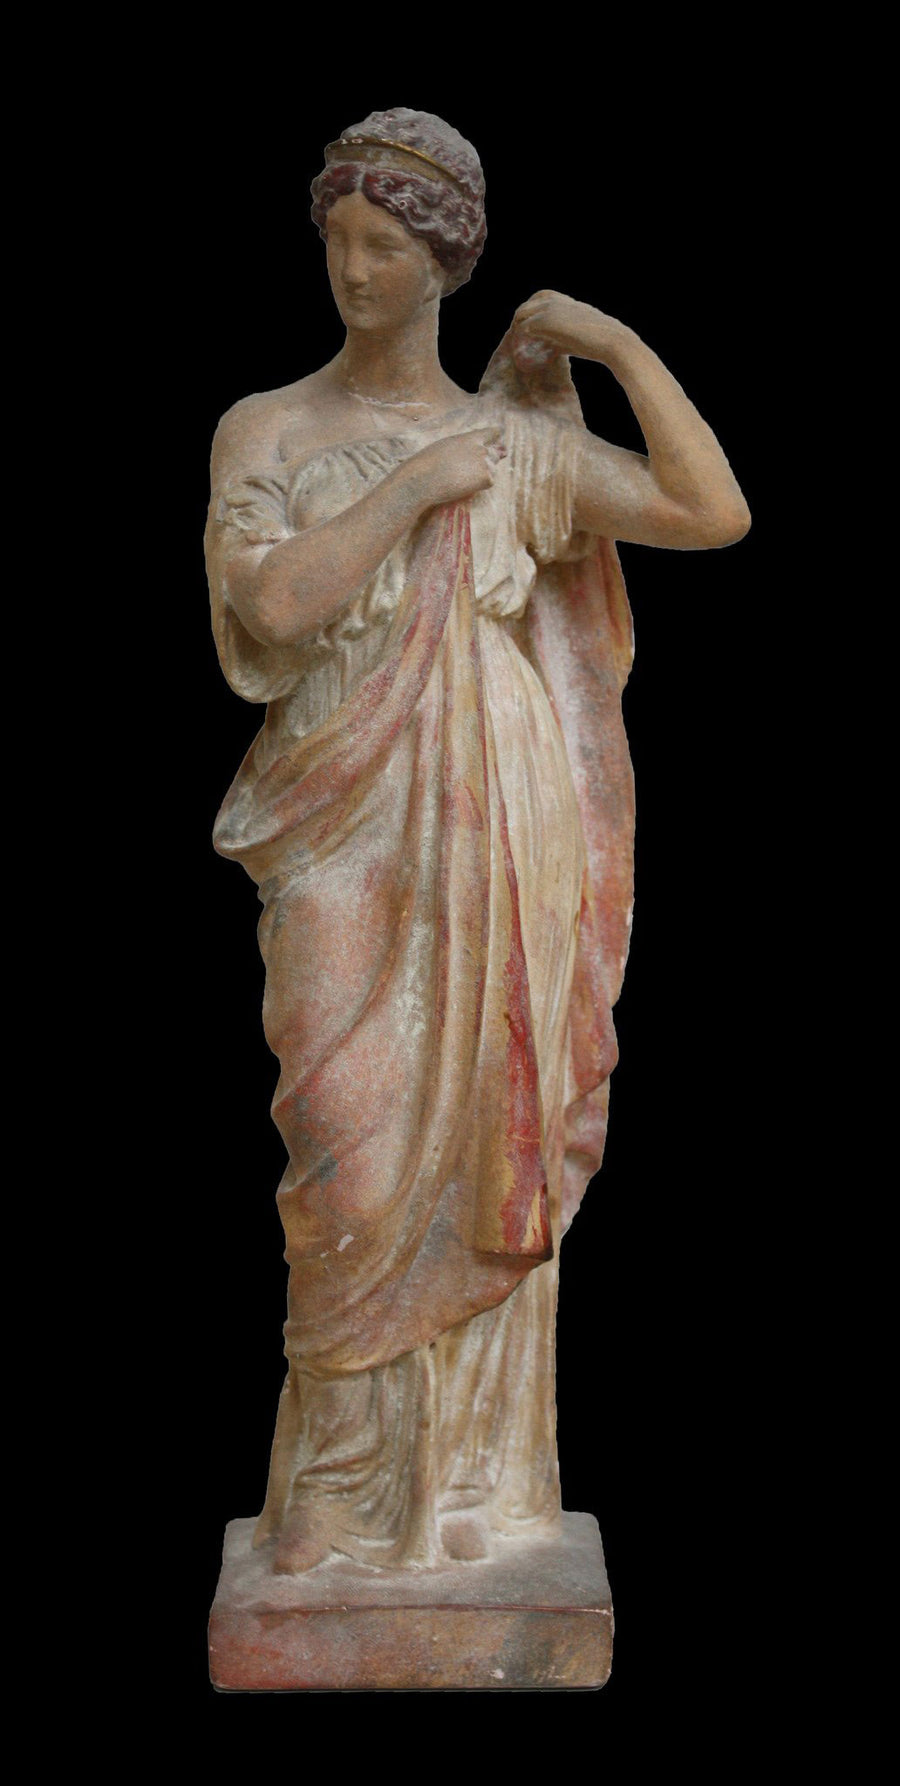 photo of plaster cast statue of female in pink robes with left arm raised  and holding robe against black background